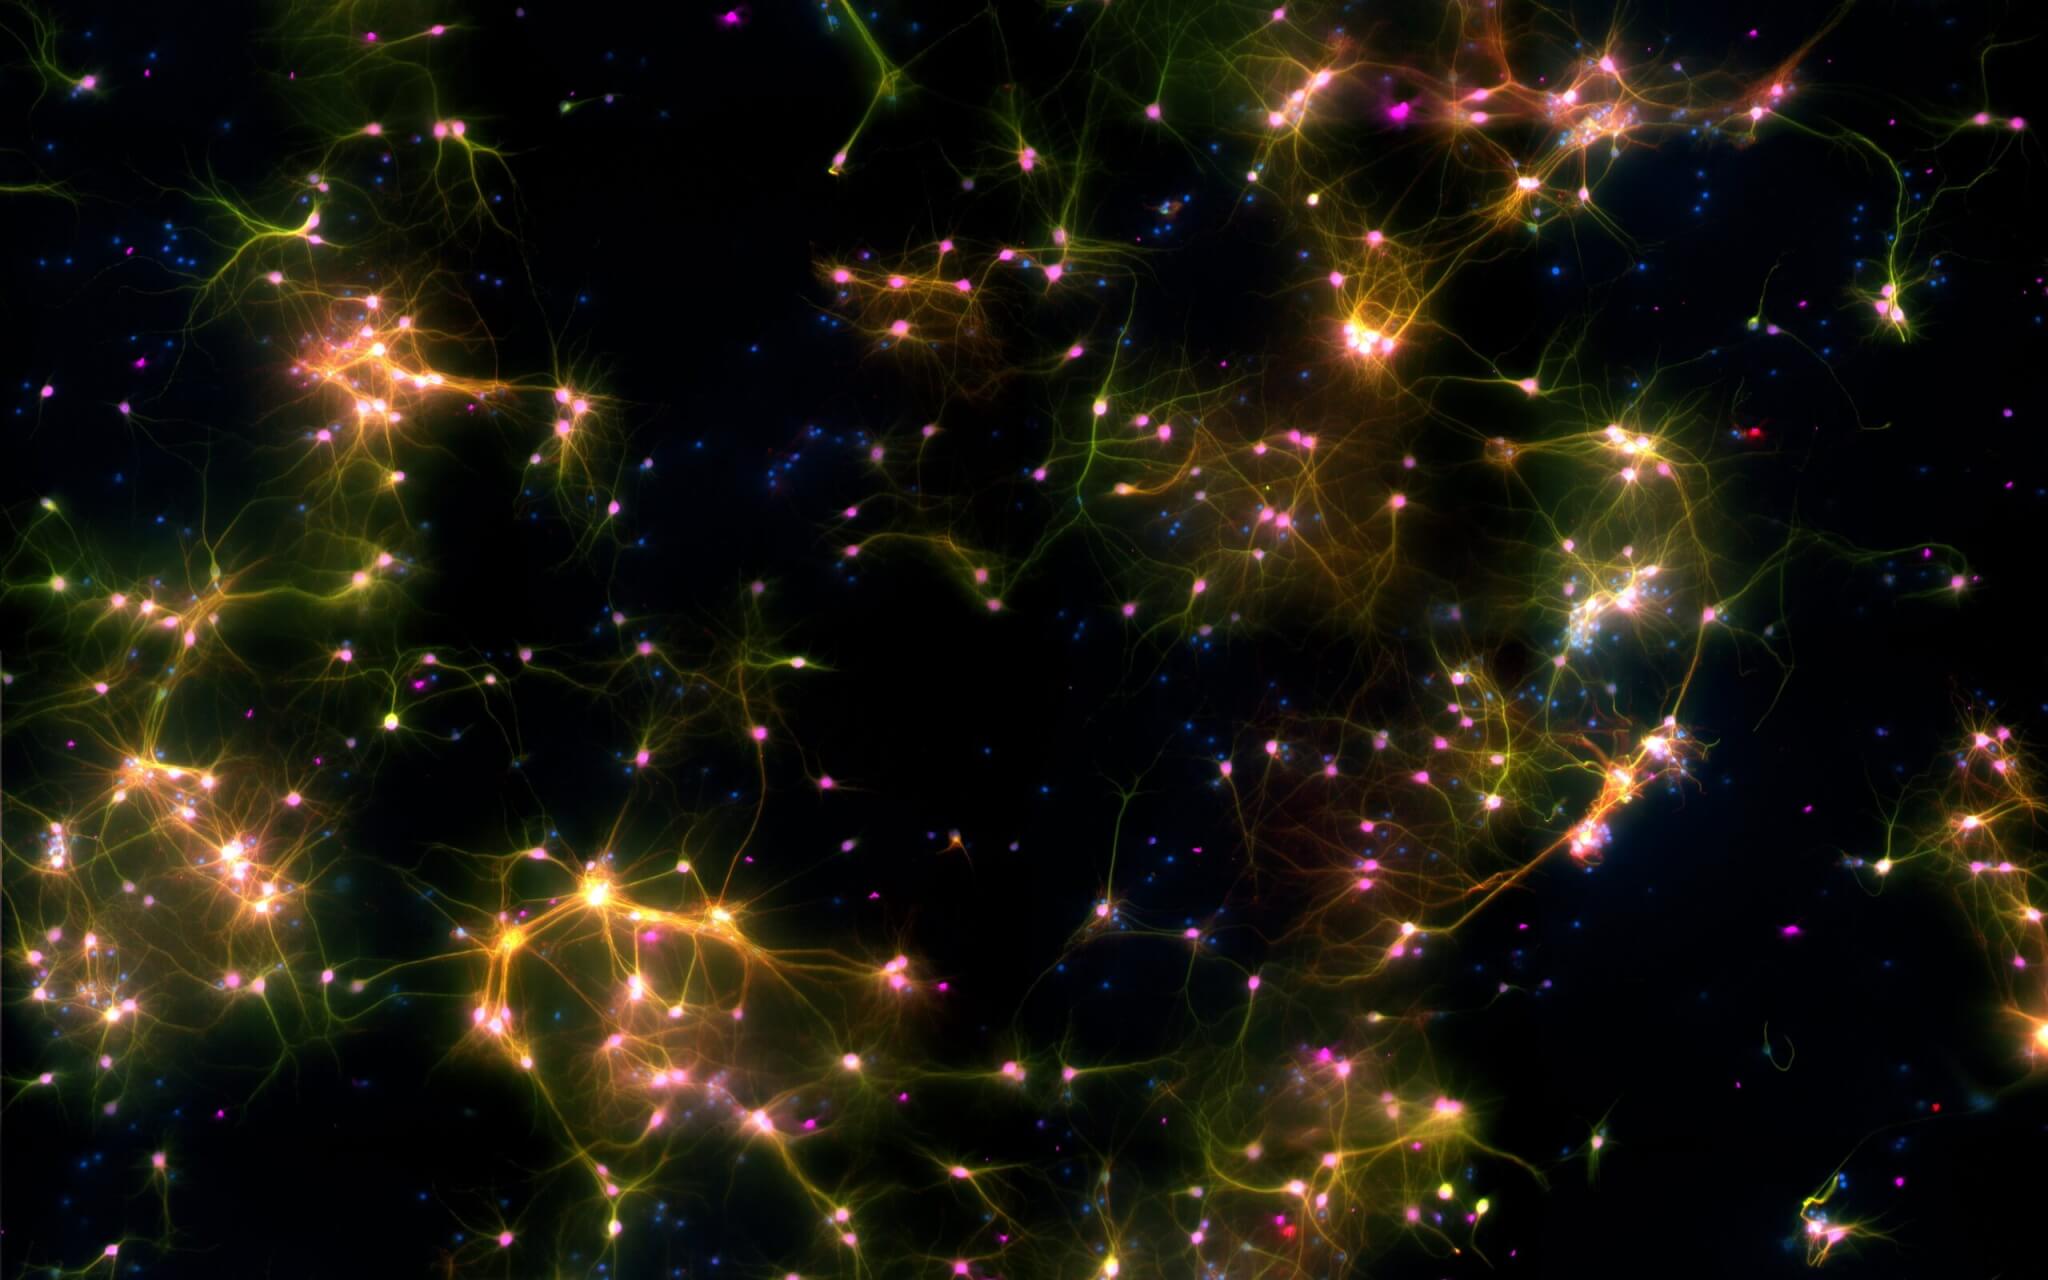 A microscopy image of neural cells where fluorescent markers show different types of cells. Green marks neurons and axons, purple marks neurons, red marks dendrites, and blue marks all cells